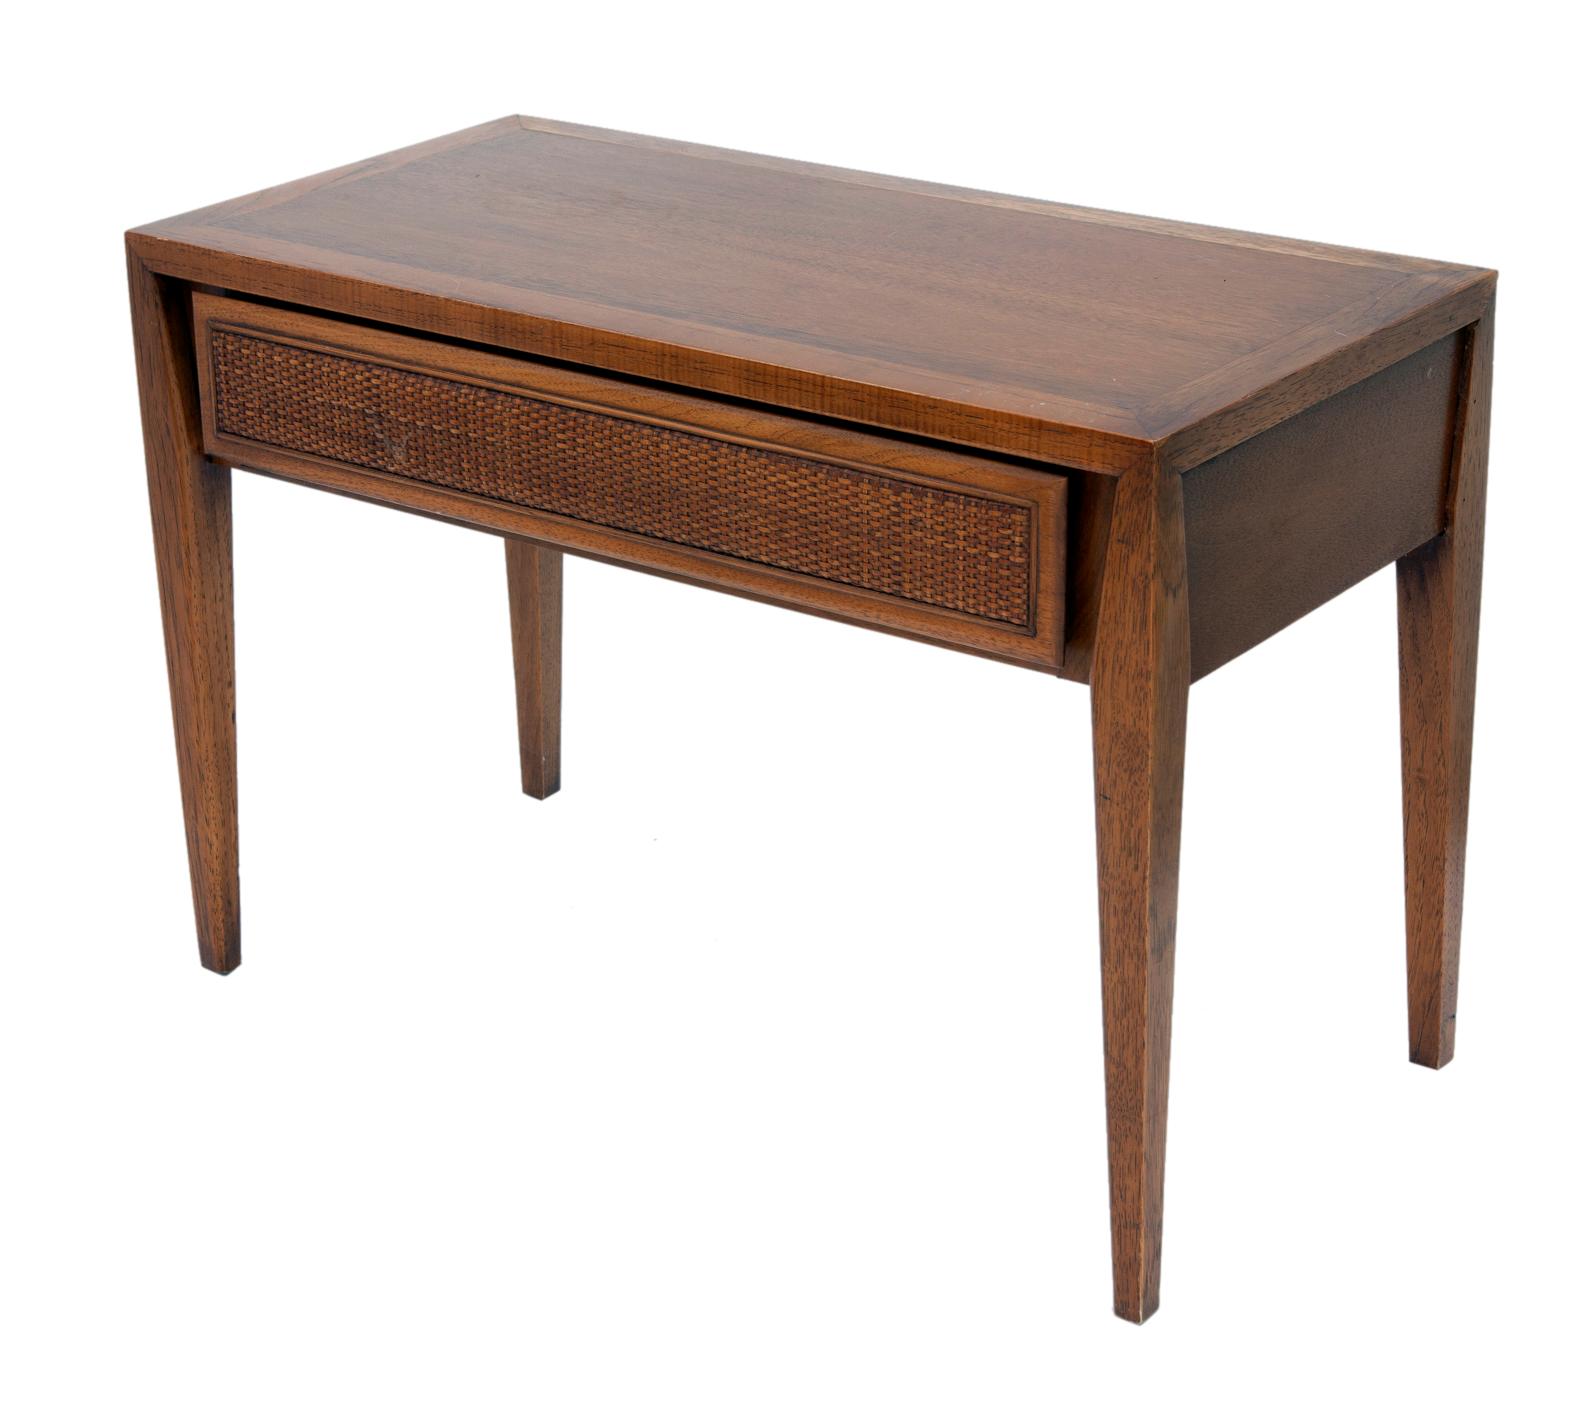 Mid Century Modern walnut side table by Century.
The table has four tapered legs & a single woven front drawer.